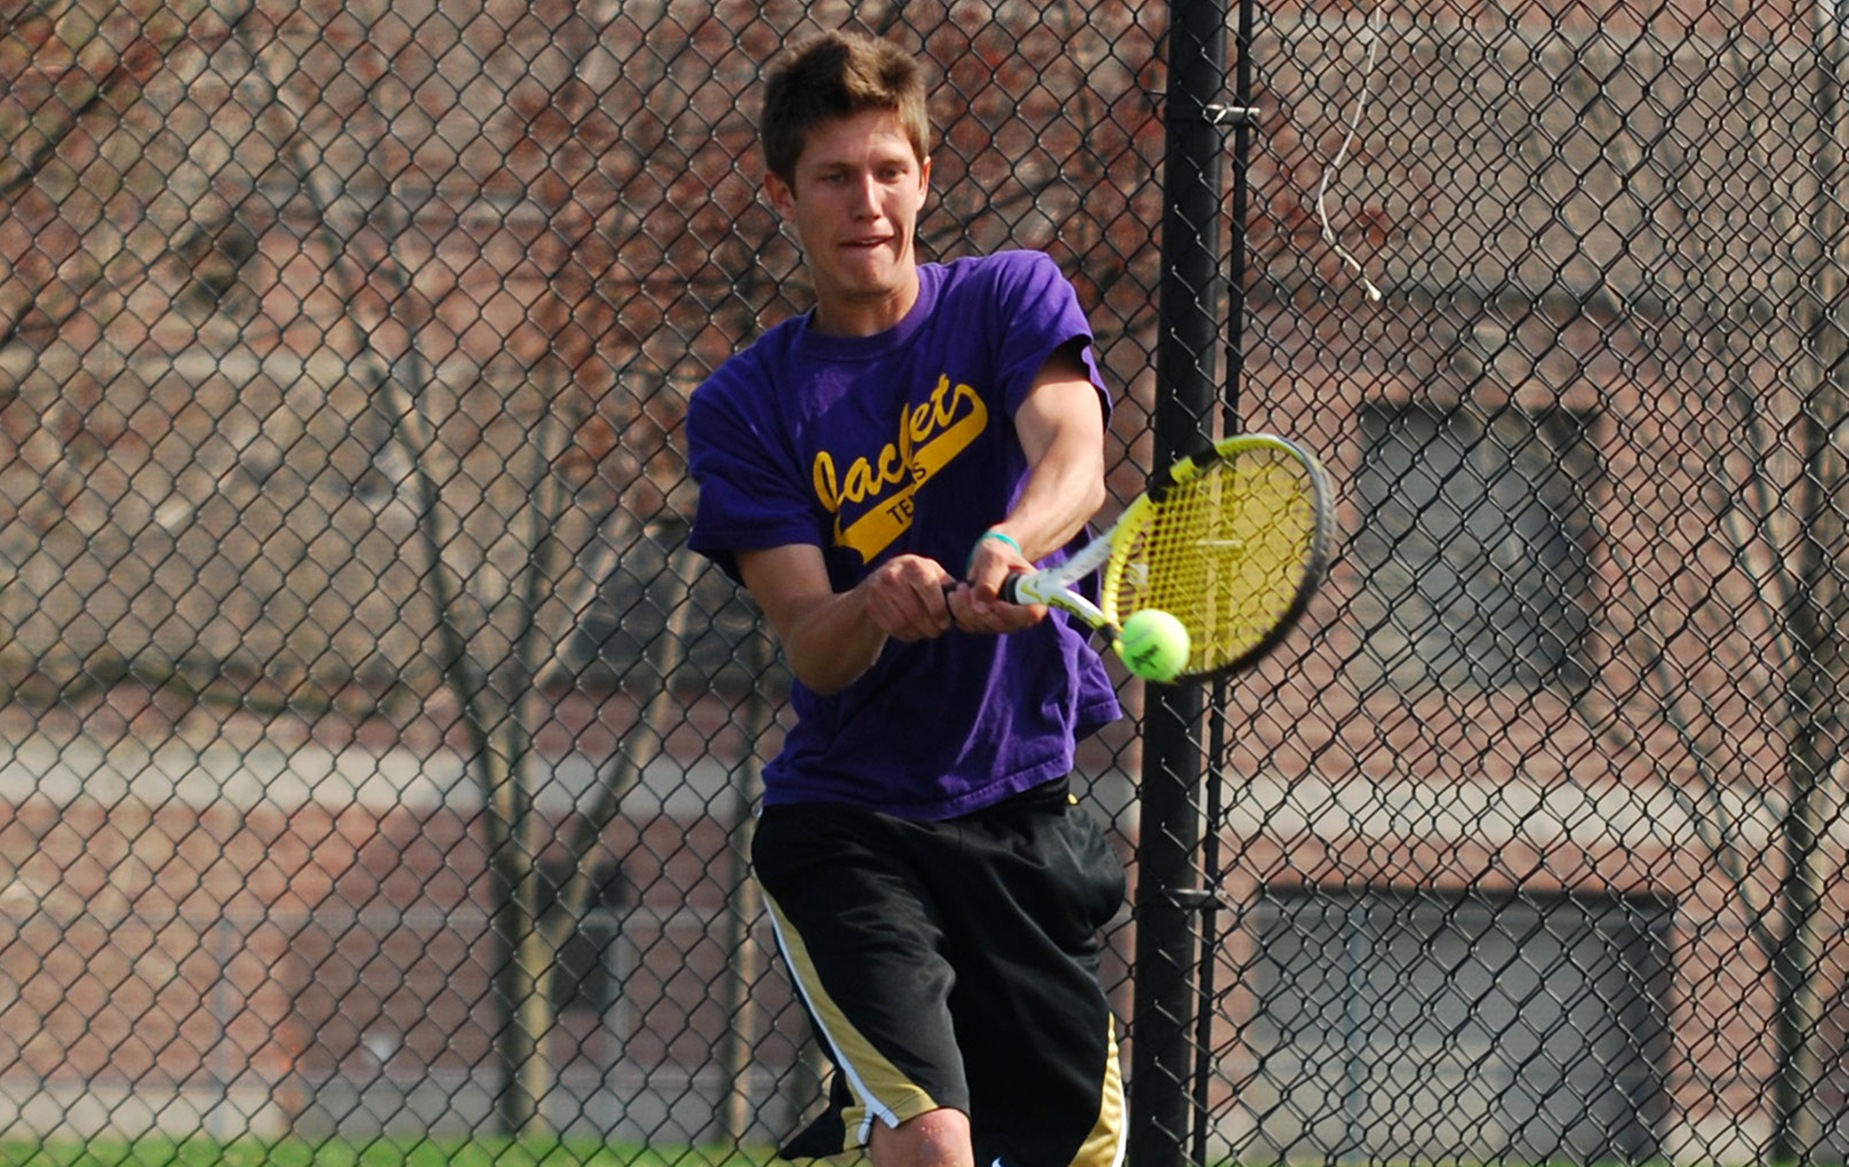 DC Suffers Defeat in First Two Matches of Spring Tennis Fest